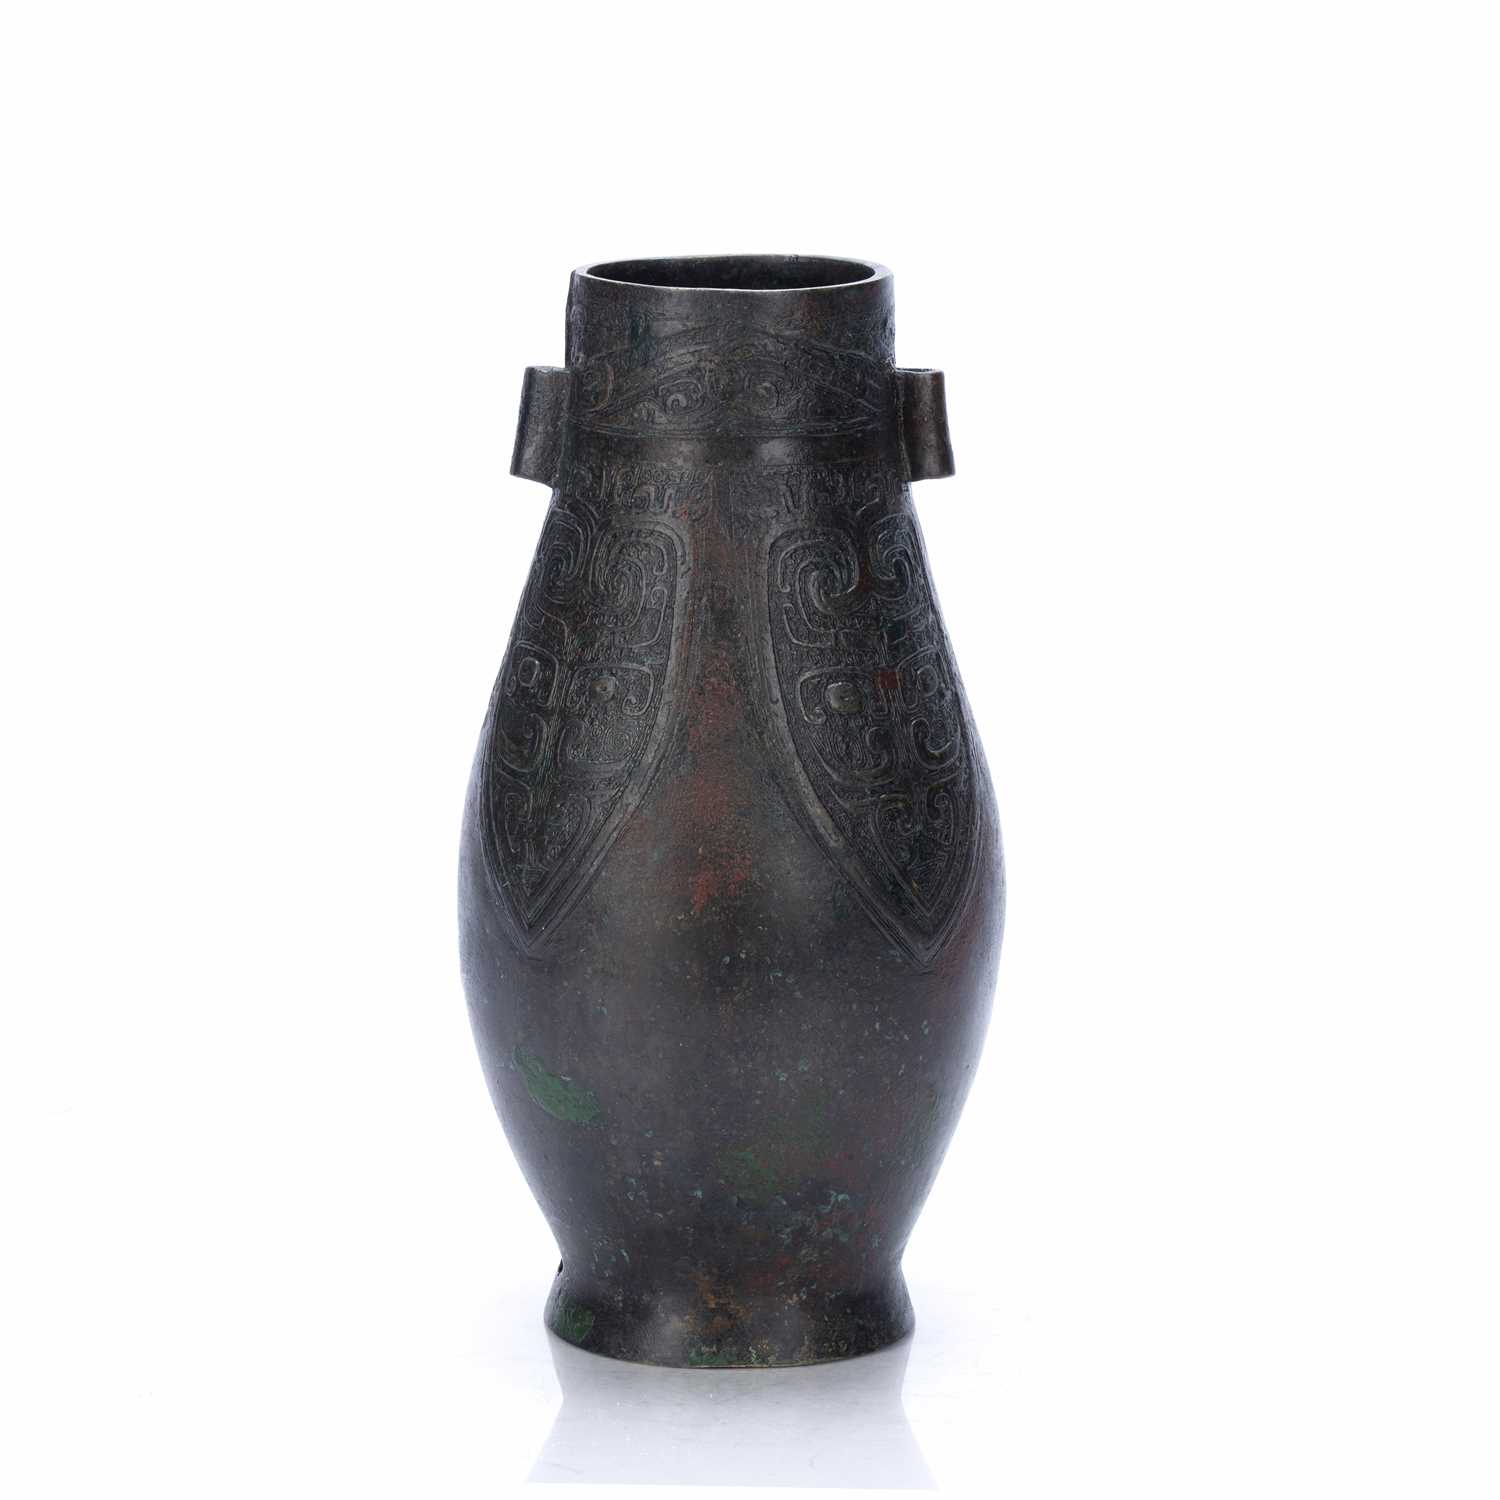 Bronze arrow vase in the Western Zhou style Chinese with taotie panels and incised four character